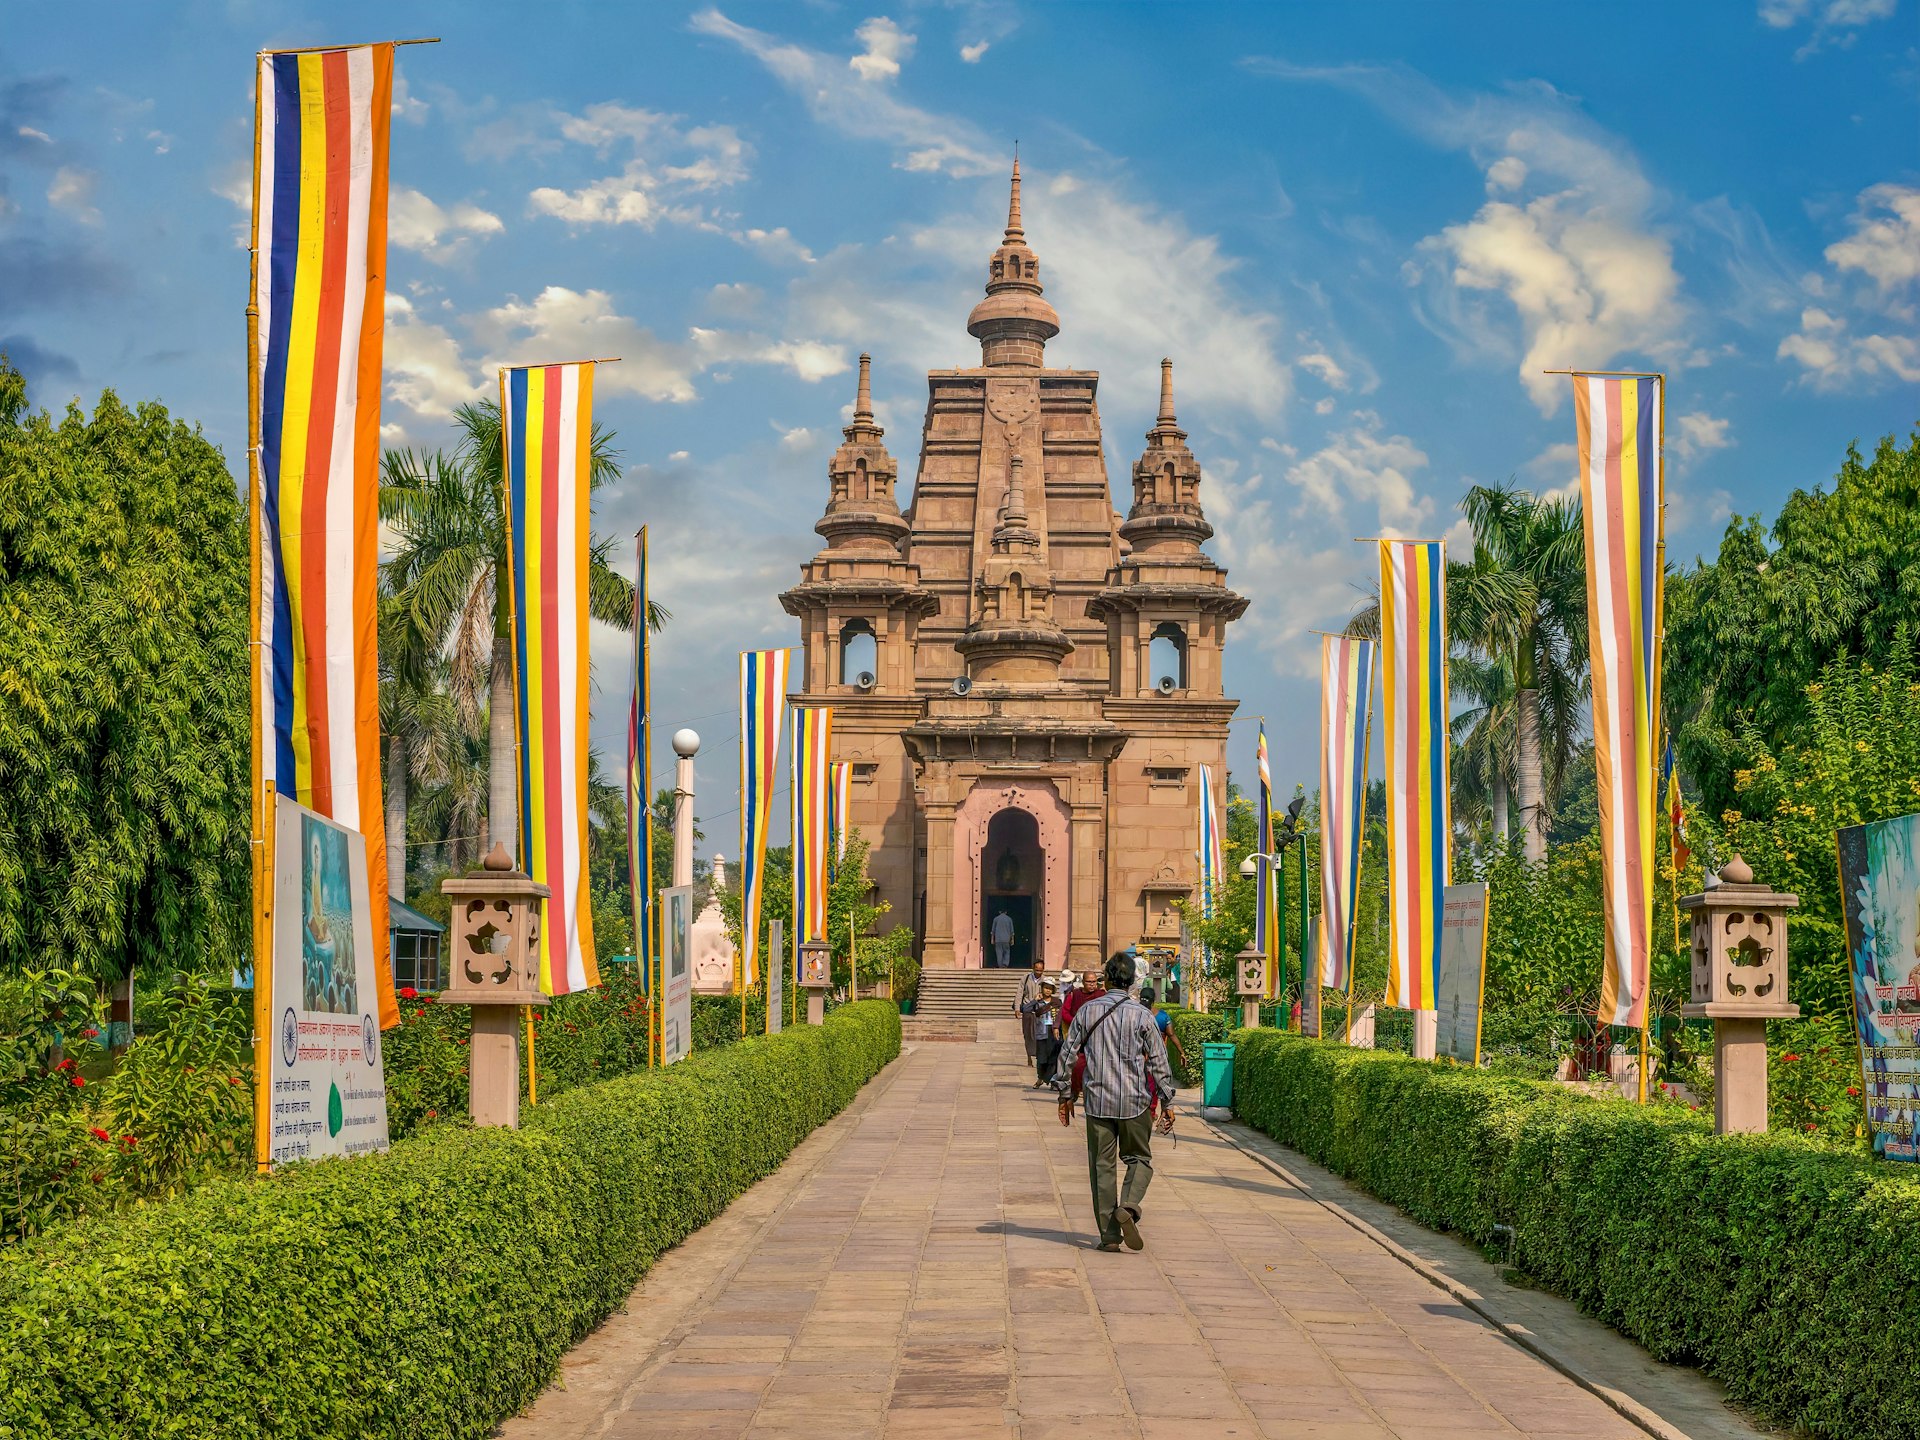 A person walks towards the entrance of a monastery and temple building